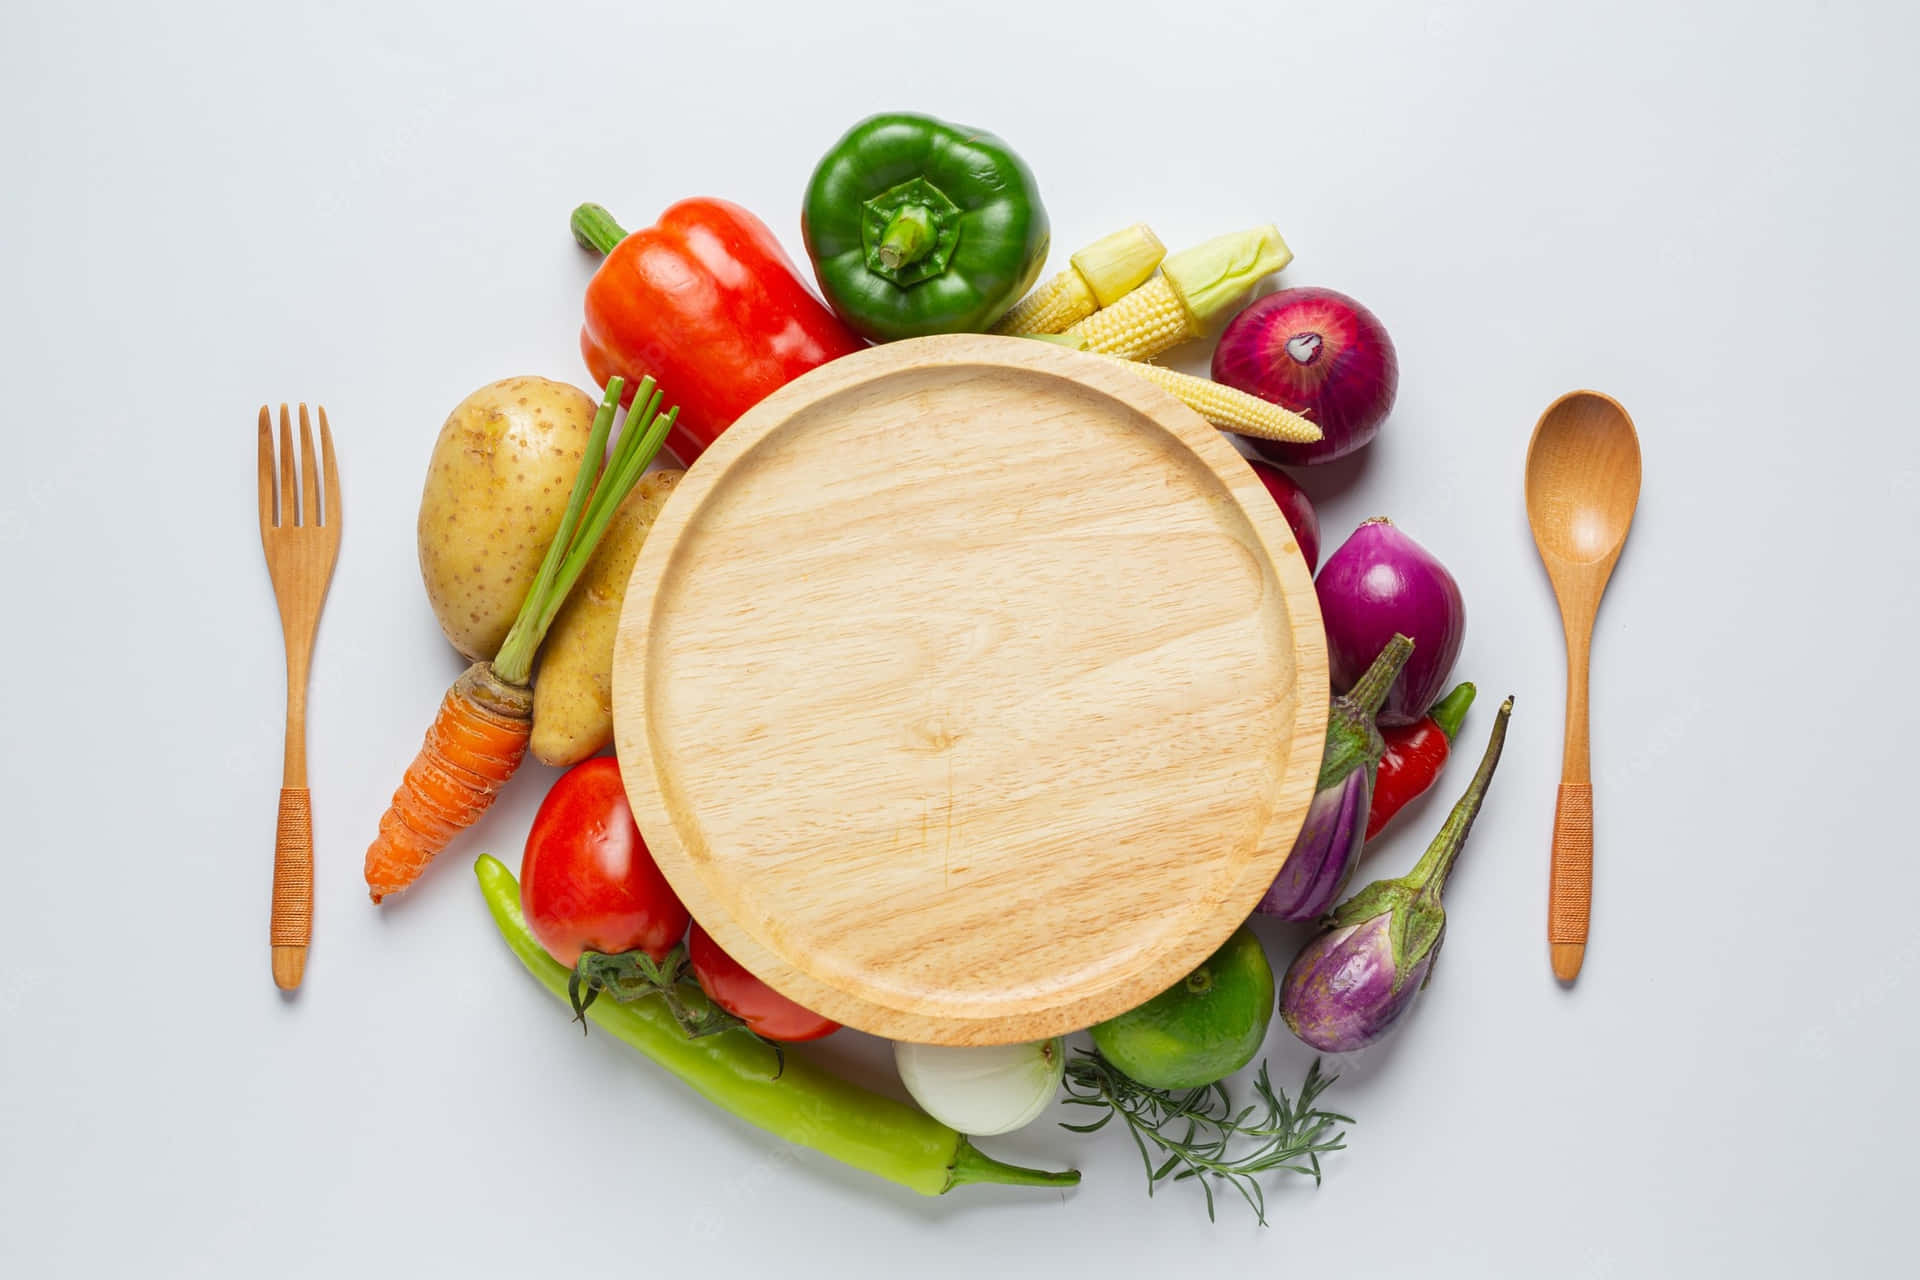 A Wooden Plate With Vegetables And Forks On A White Background Wallpaper